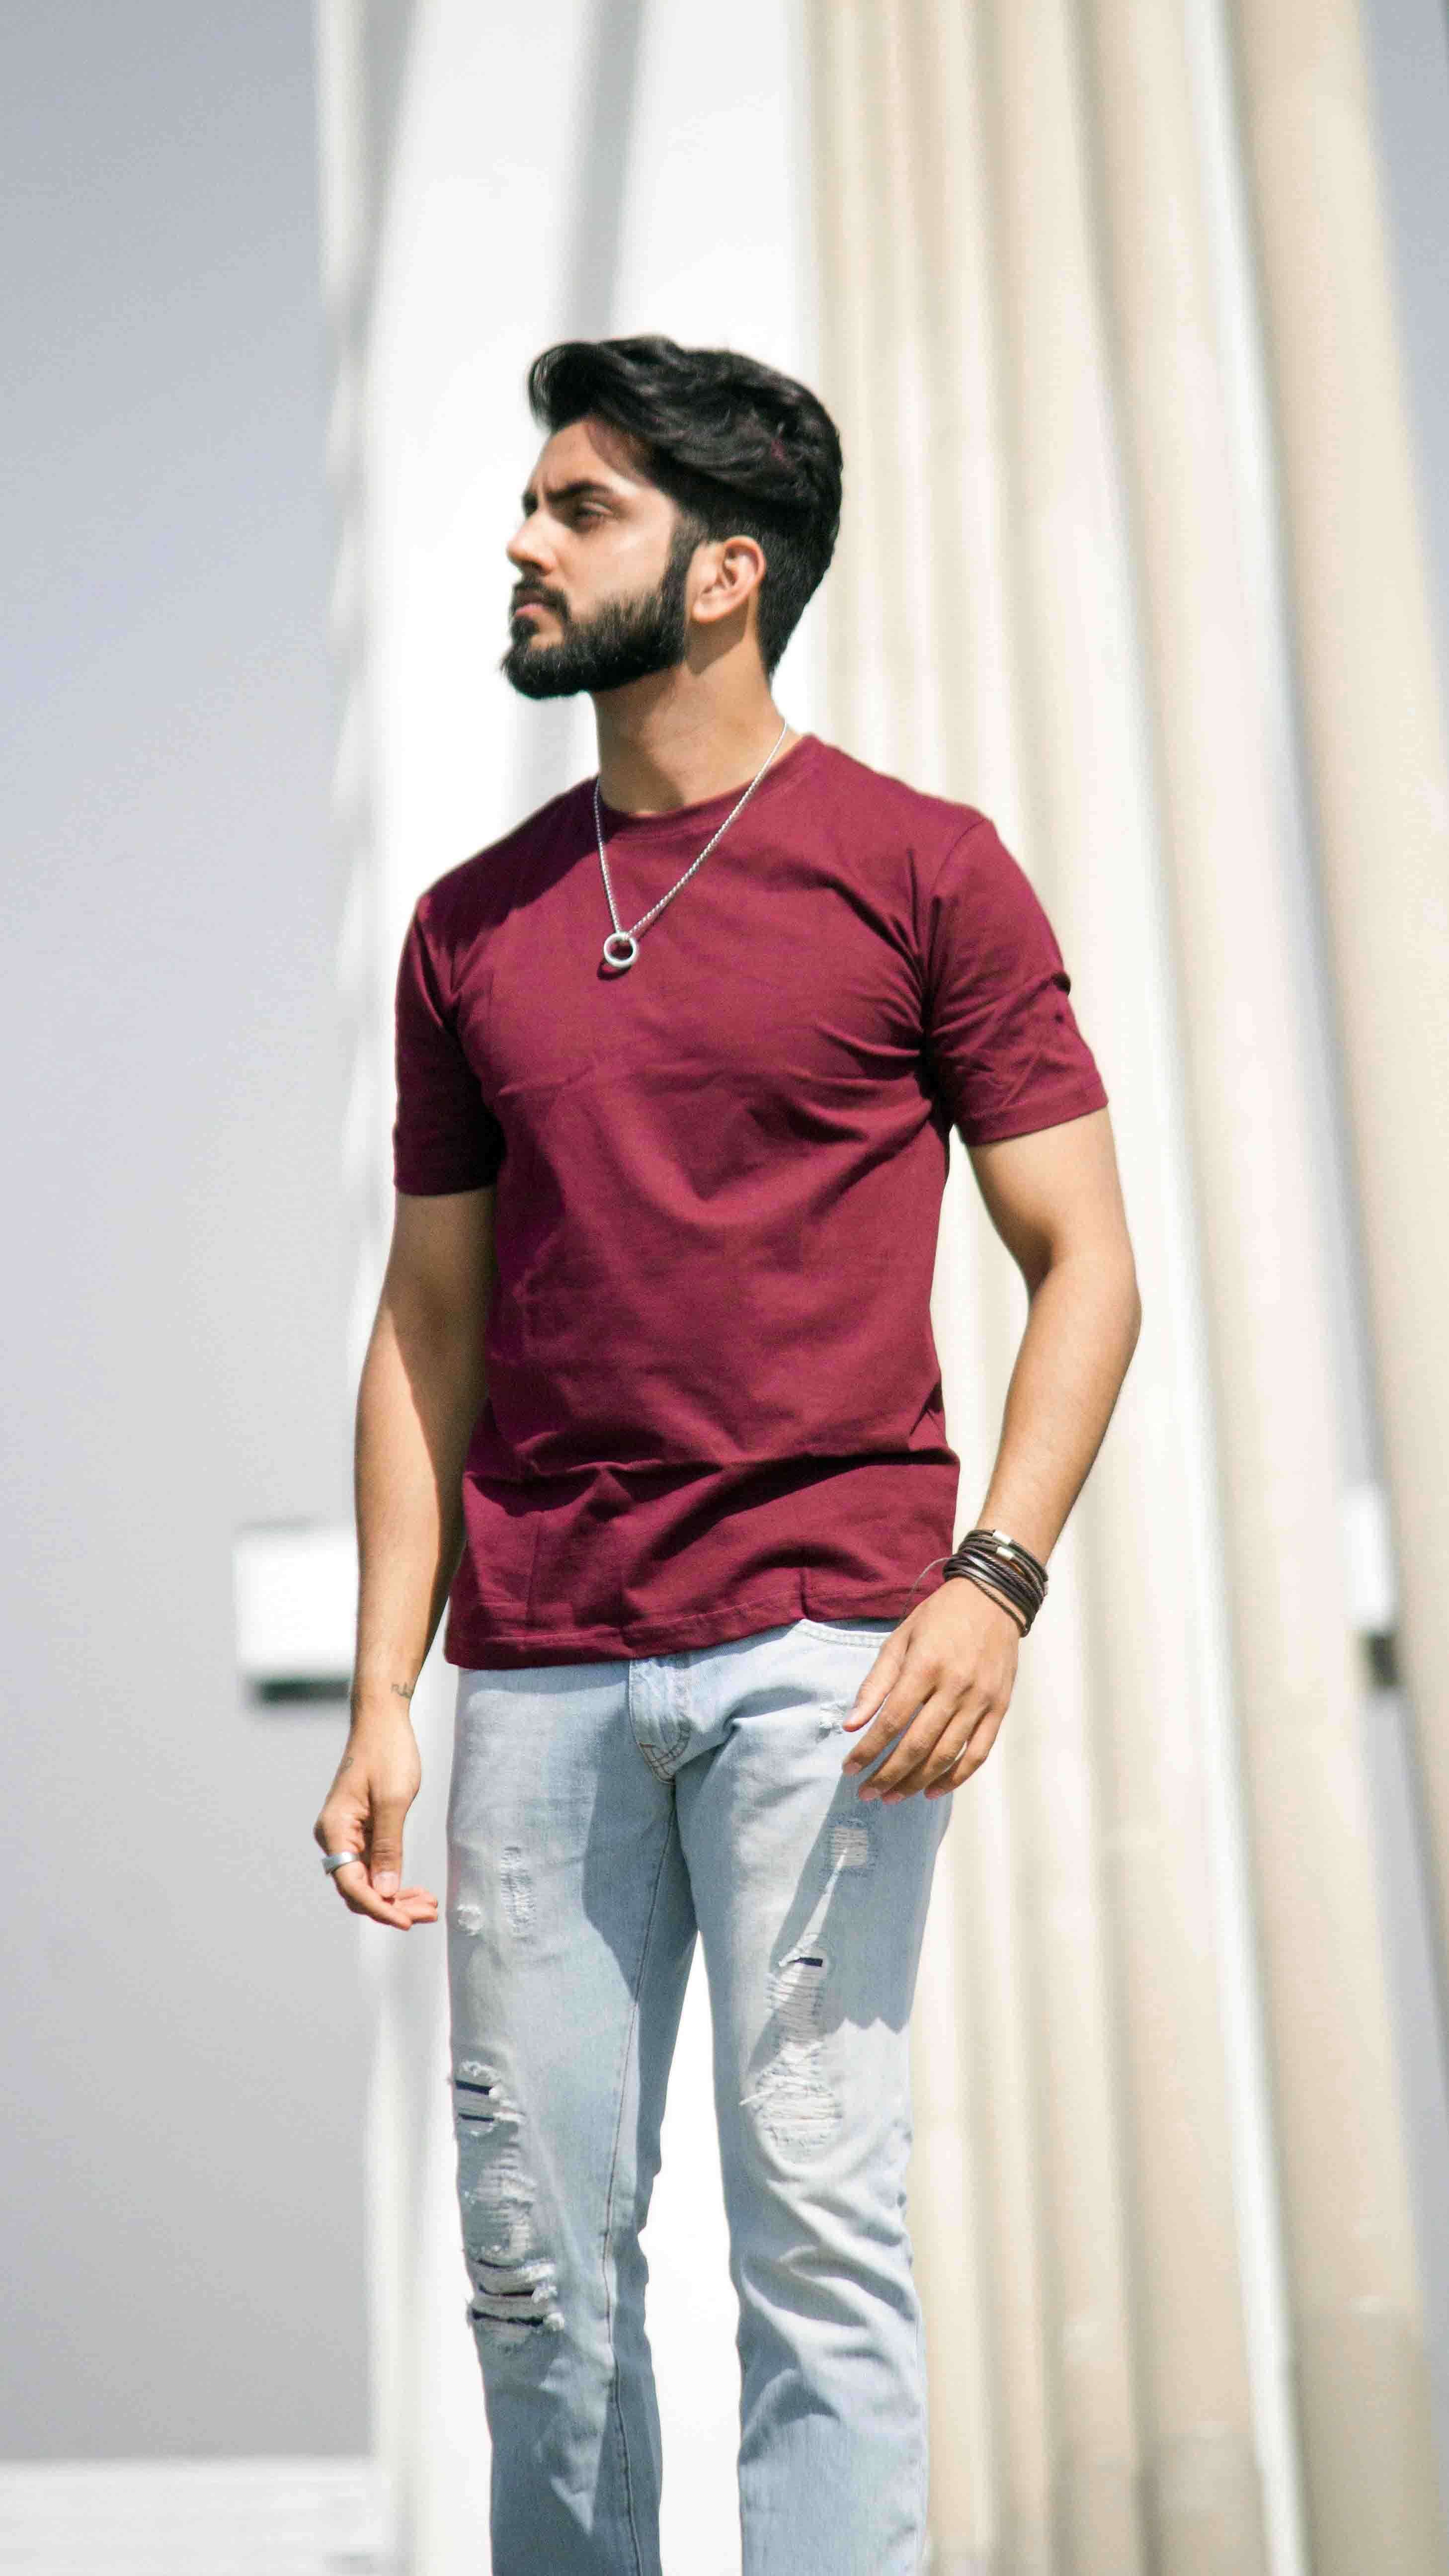 Corporate Polo T-shirt Manufacturers and Suppliers Gujarat Bangalore